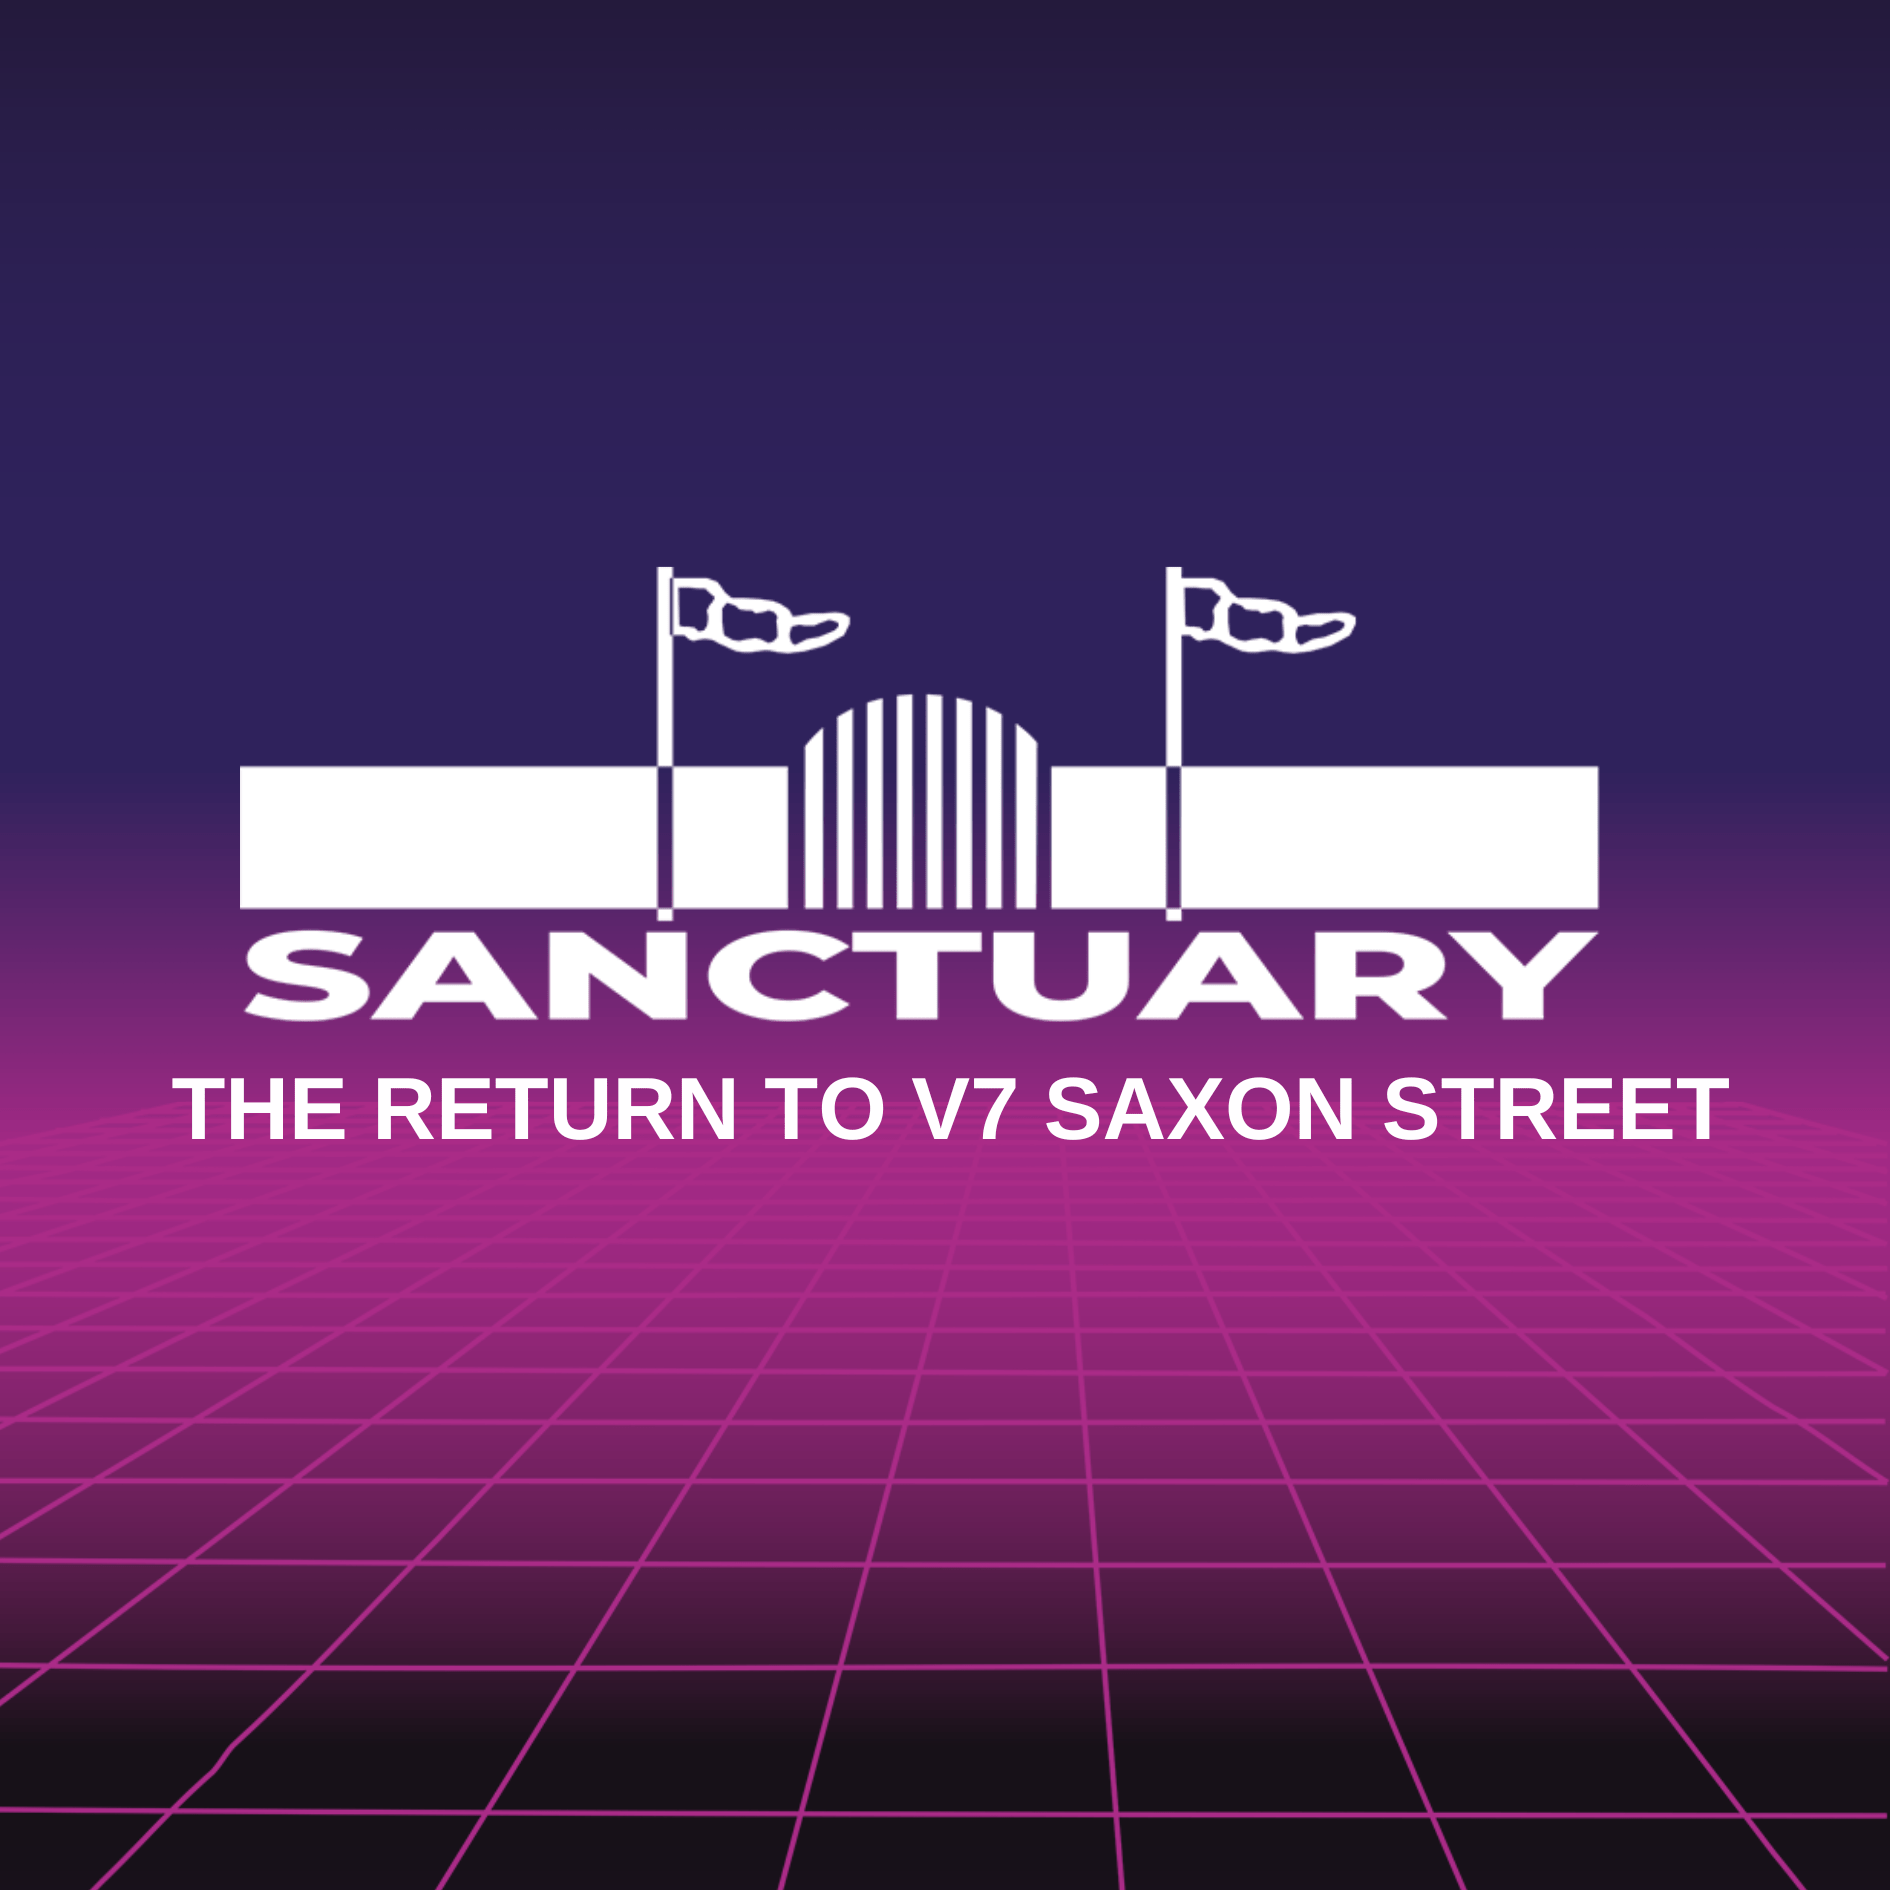 Reunion event announced for The Sanctuary in Milton Keynes